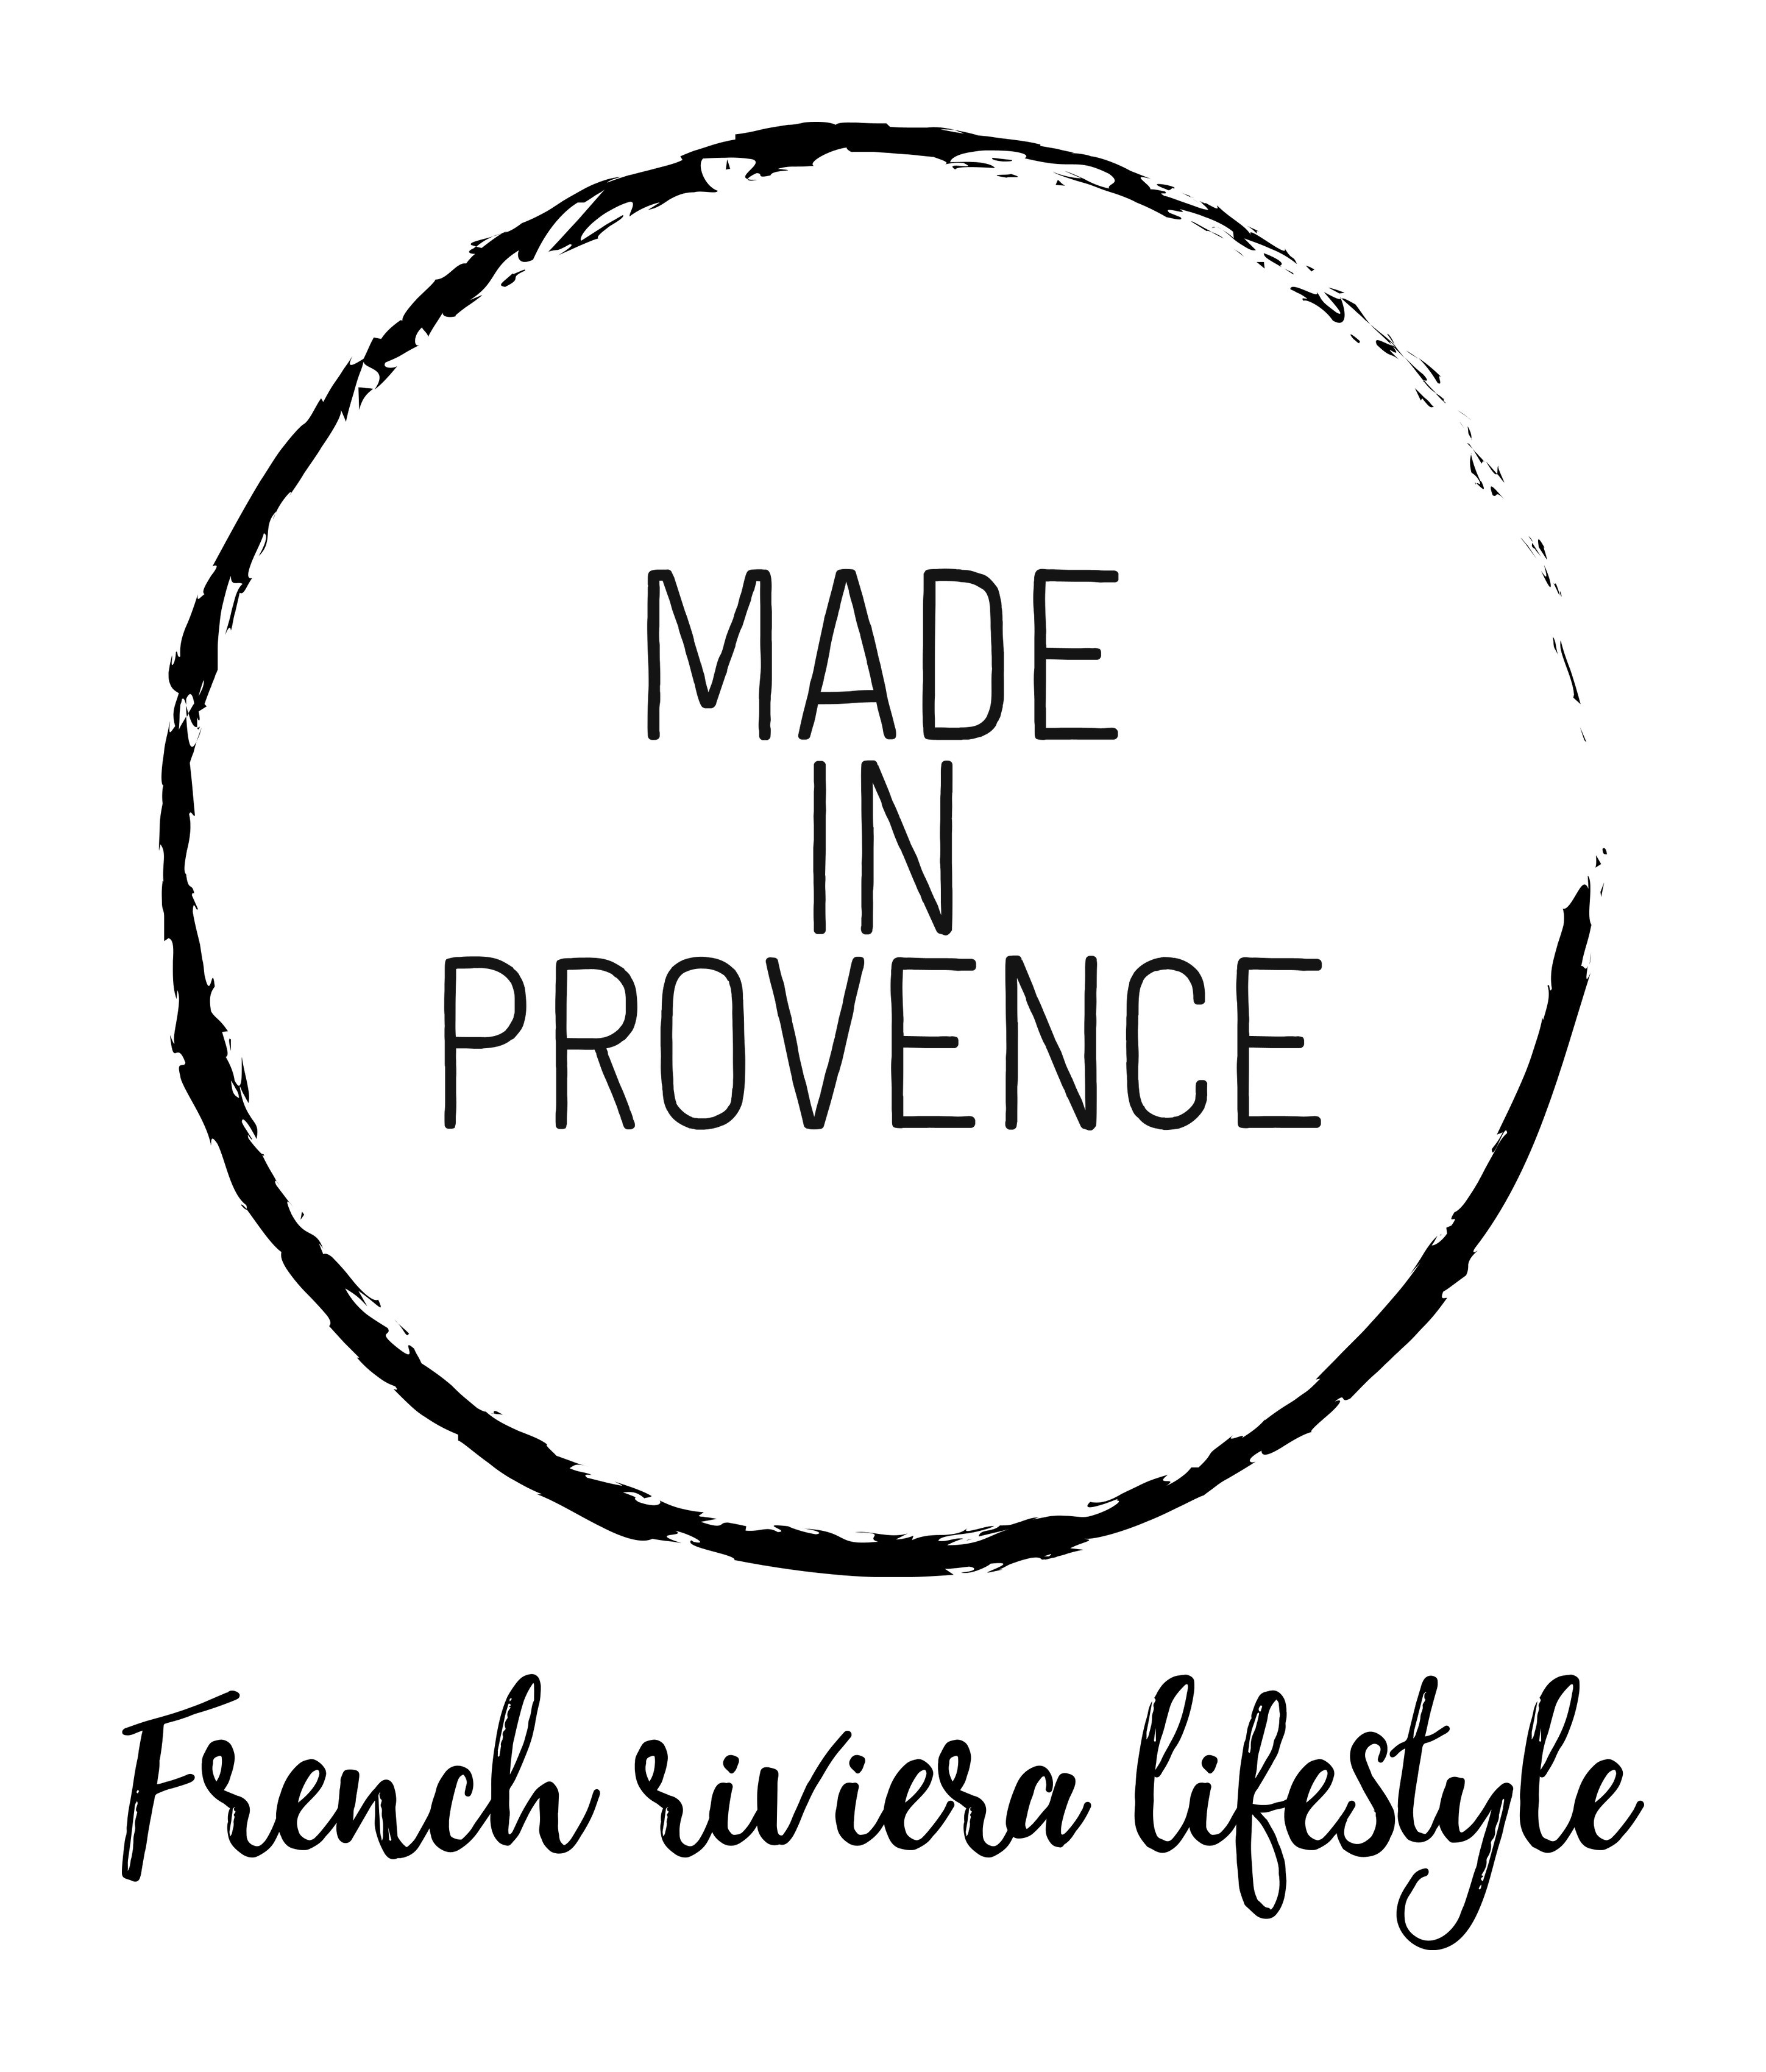 MADE IN PROVENCE